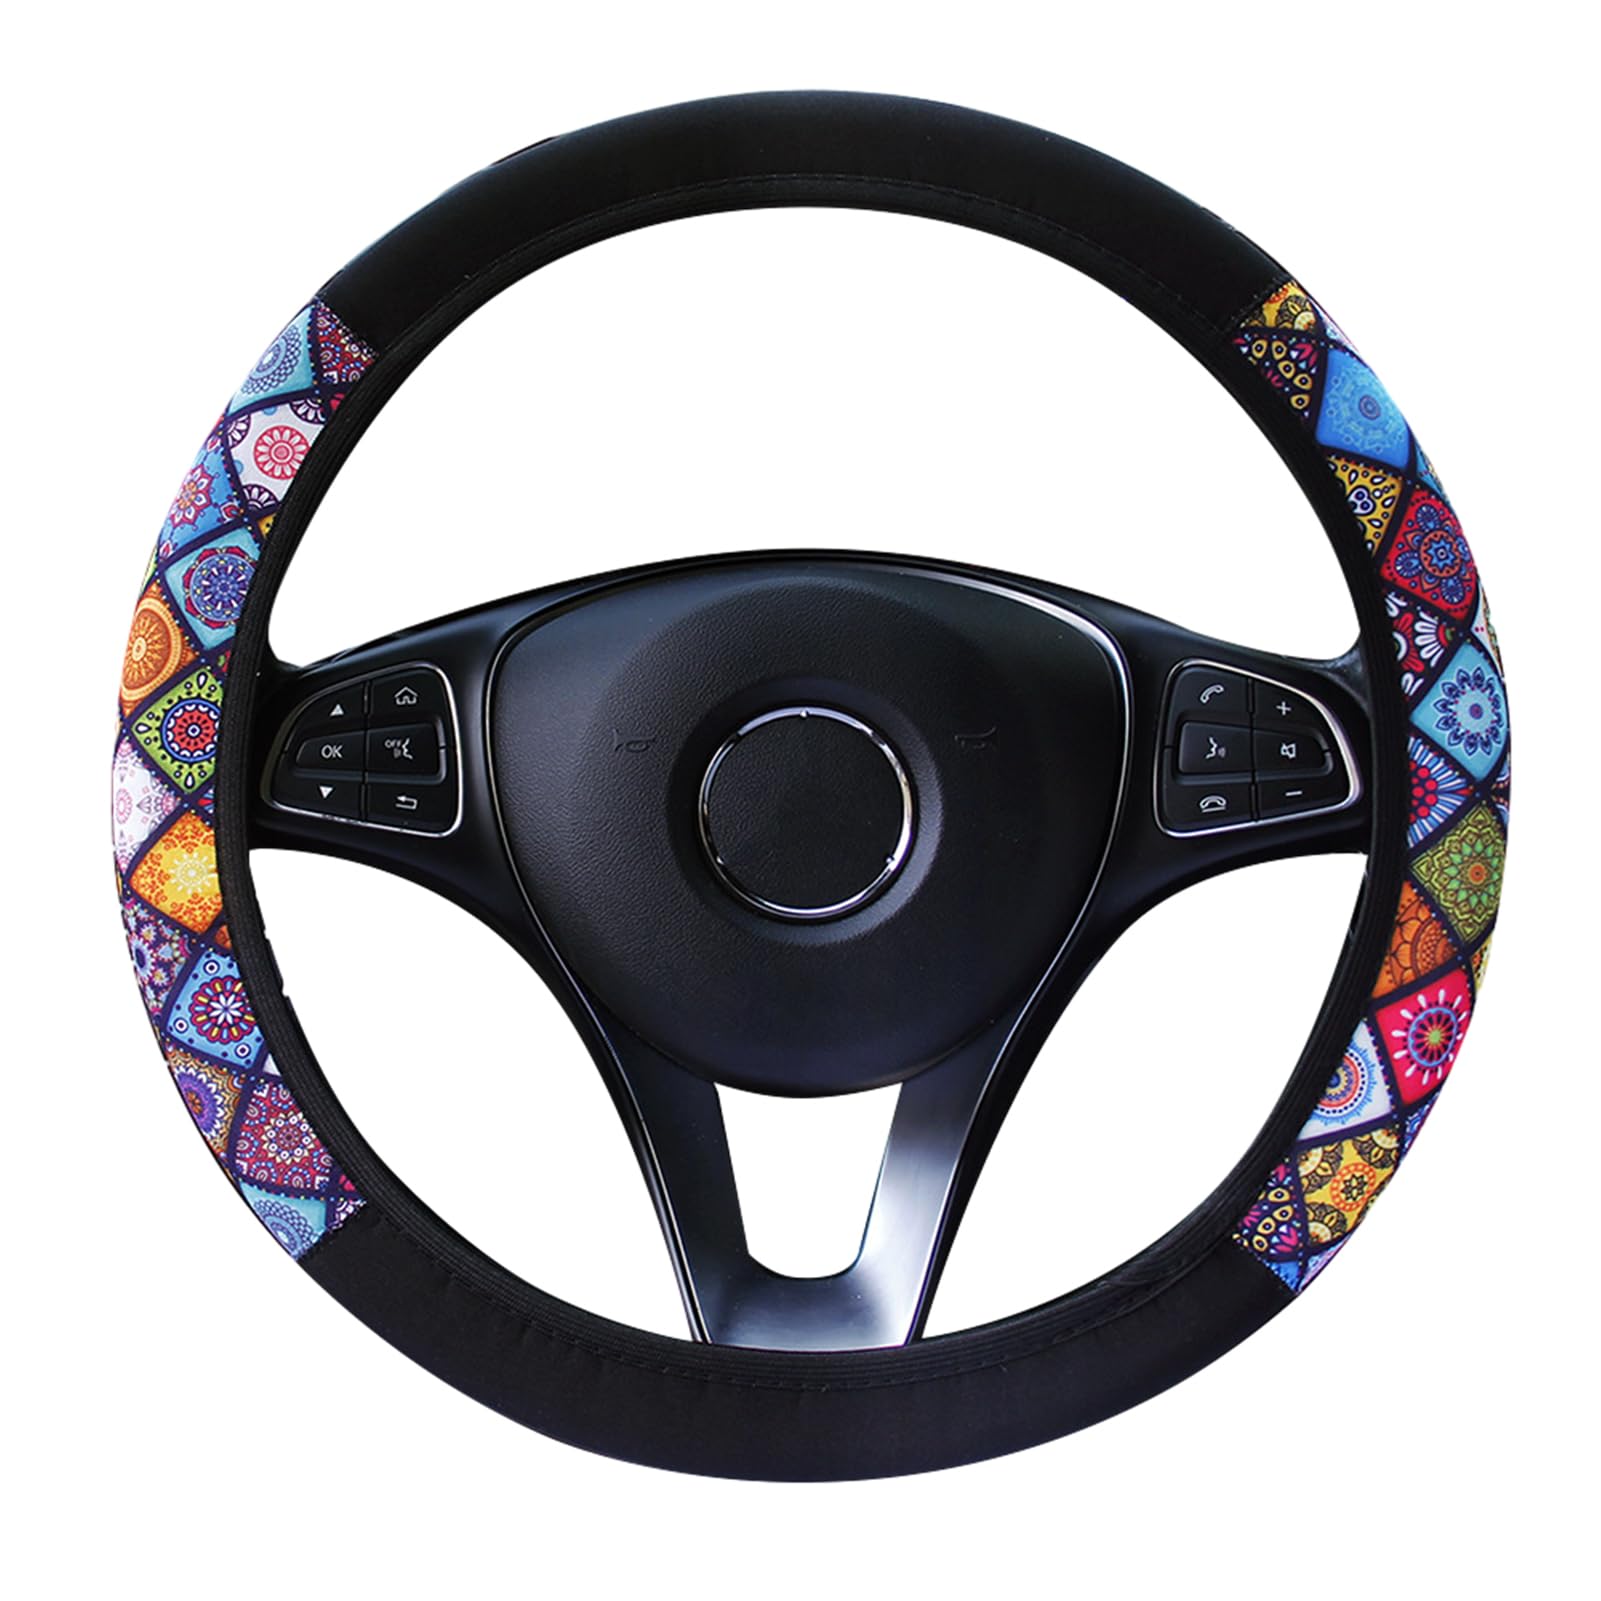 Ethnic Style Car Steering Wheel Cover, Fabric Steering Wheel Cover,Coarse Flax Cloth Car Steering Wheel Covers,Anti-Slip and Sweat Absorption Car Wrap Cover,Fits Most Cars 37 38cm von Divono